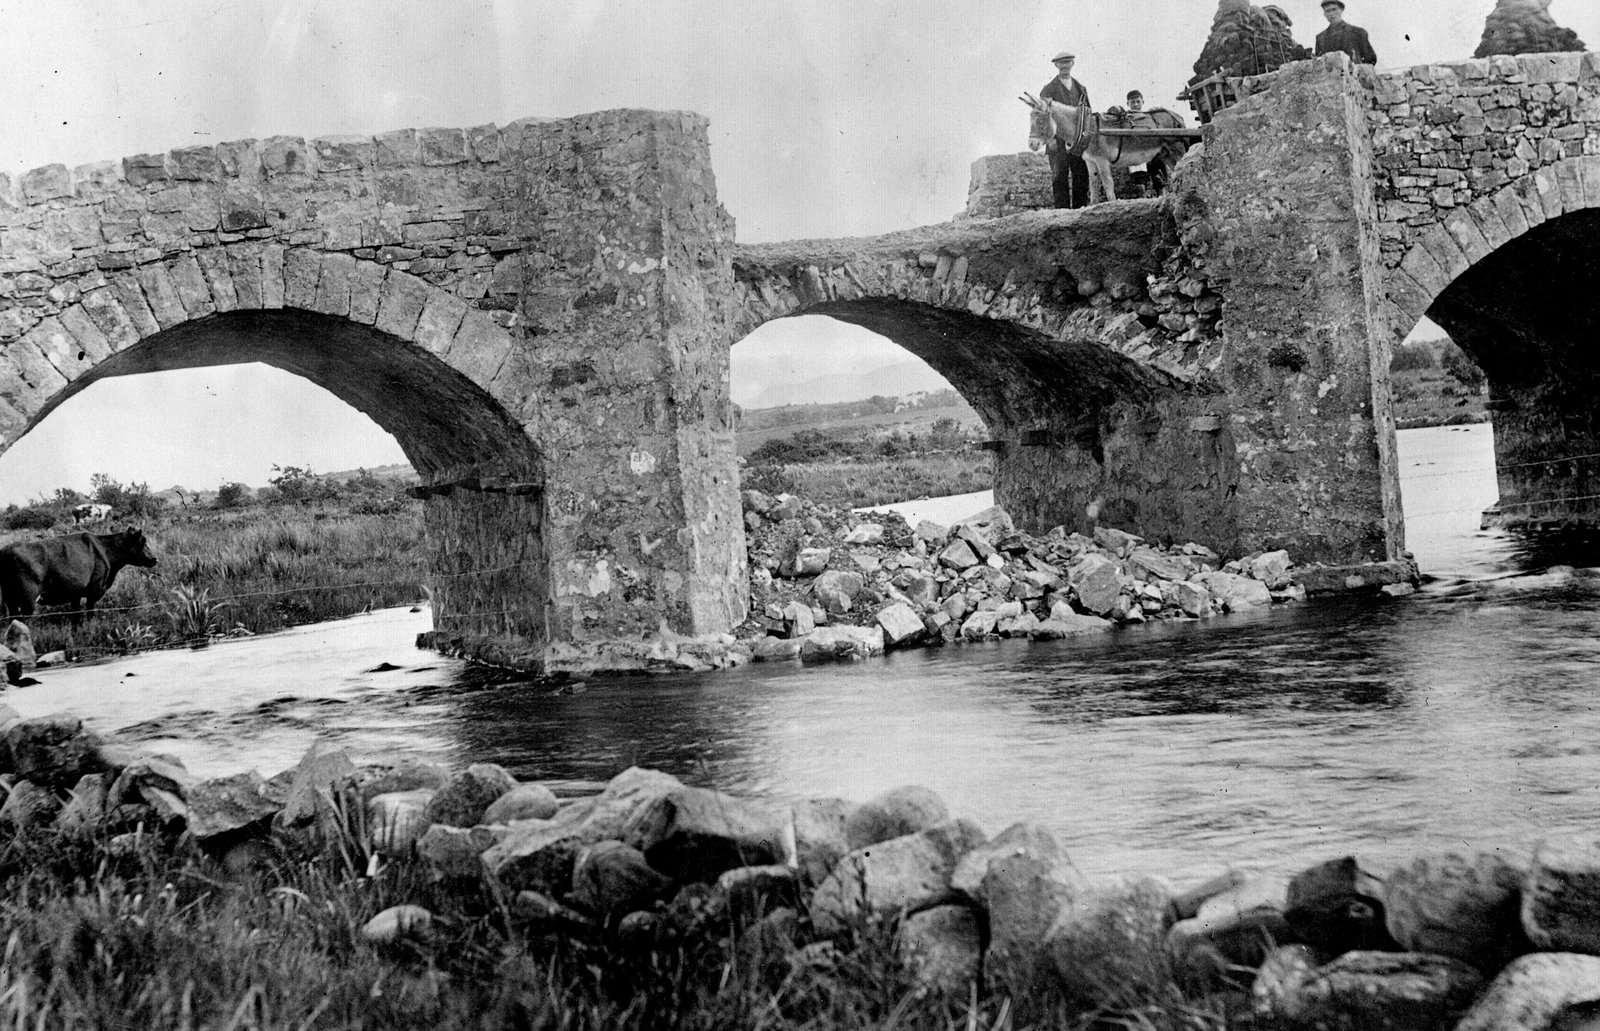 Image - July 1922: A bridge in County Leitrim destroyed by anti-Treaty forces. Crowder/Topical Press Agency/Getty Images